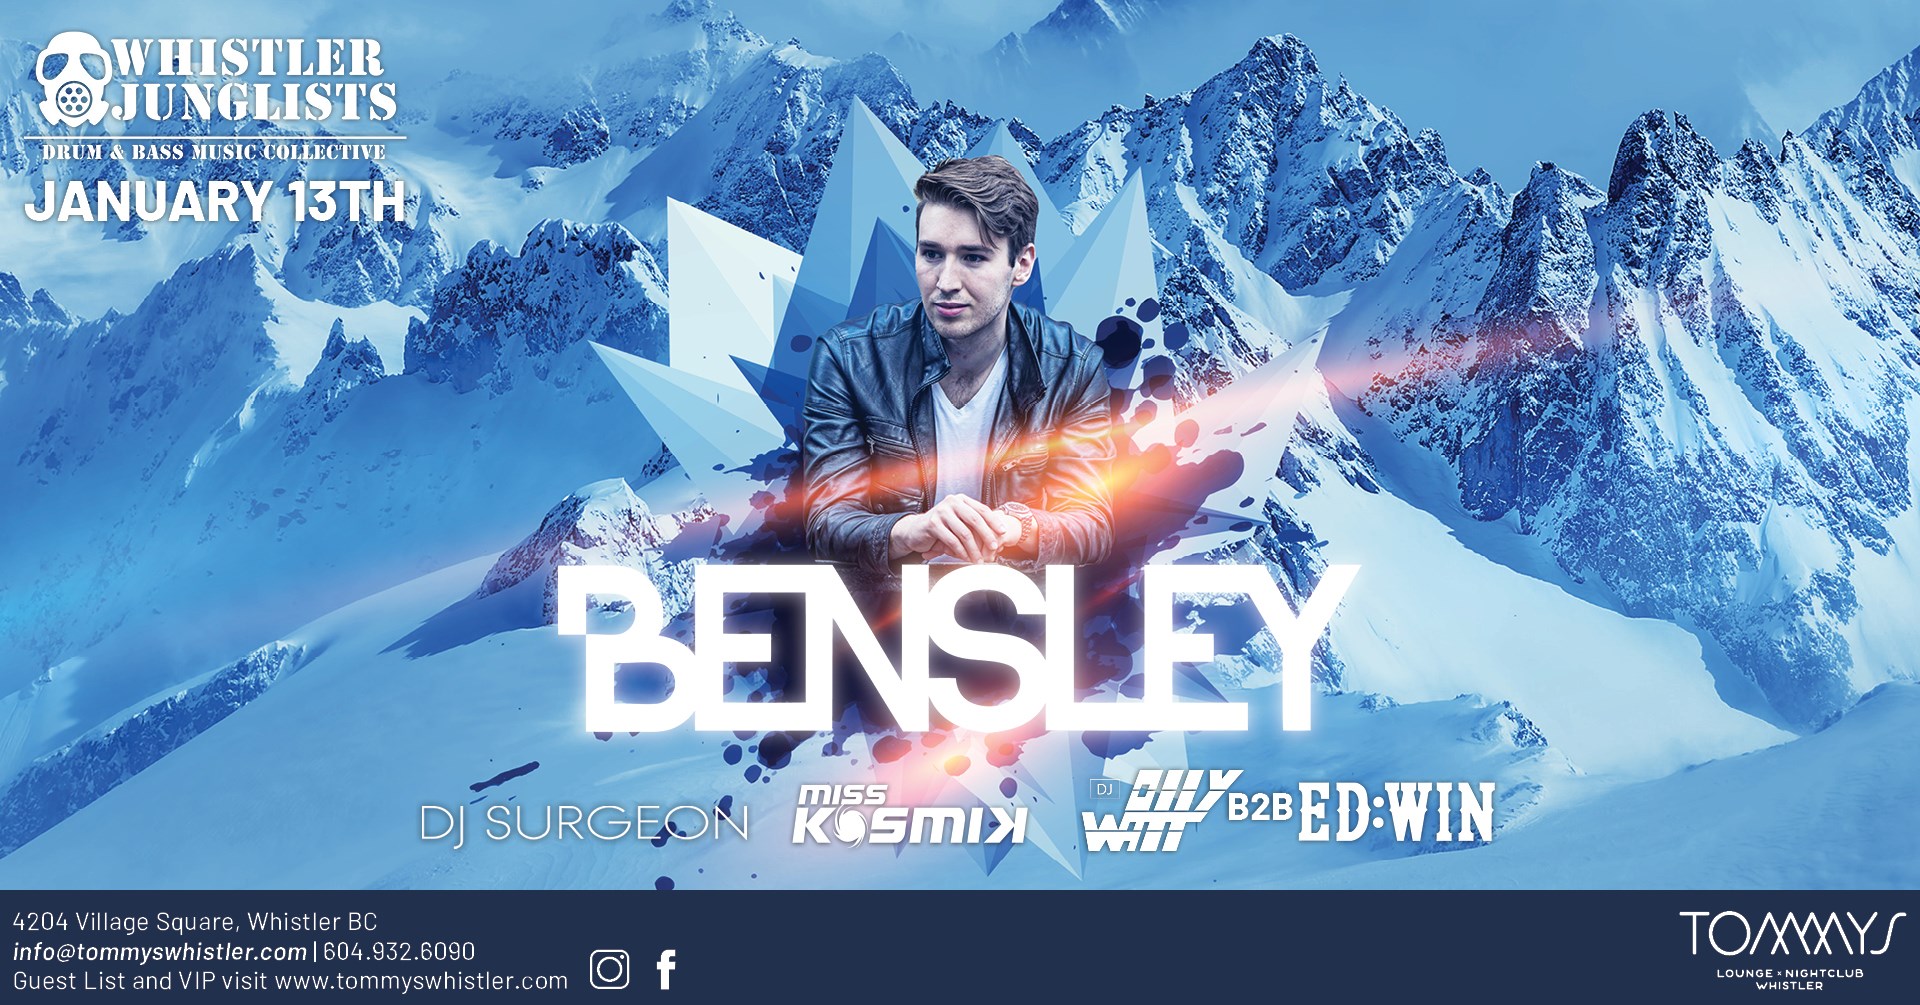 Bensley at Tommys Whistler January 12, 2020